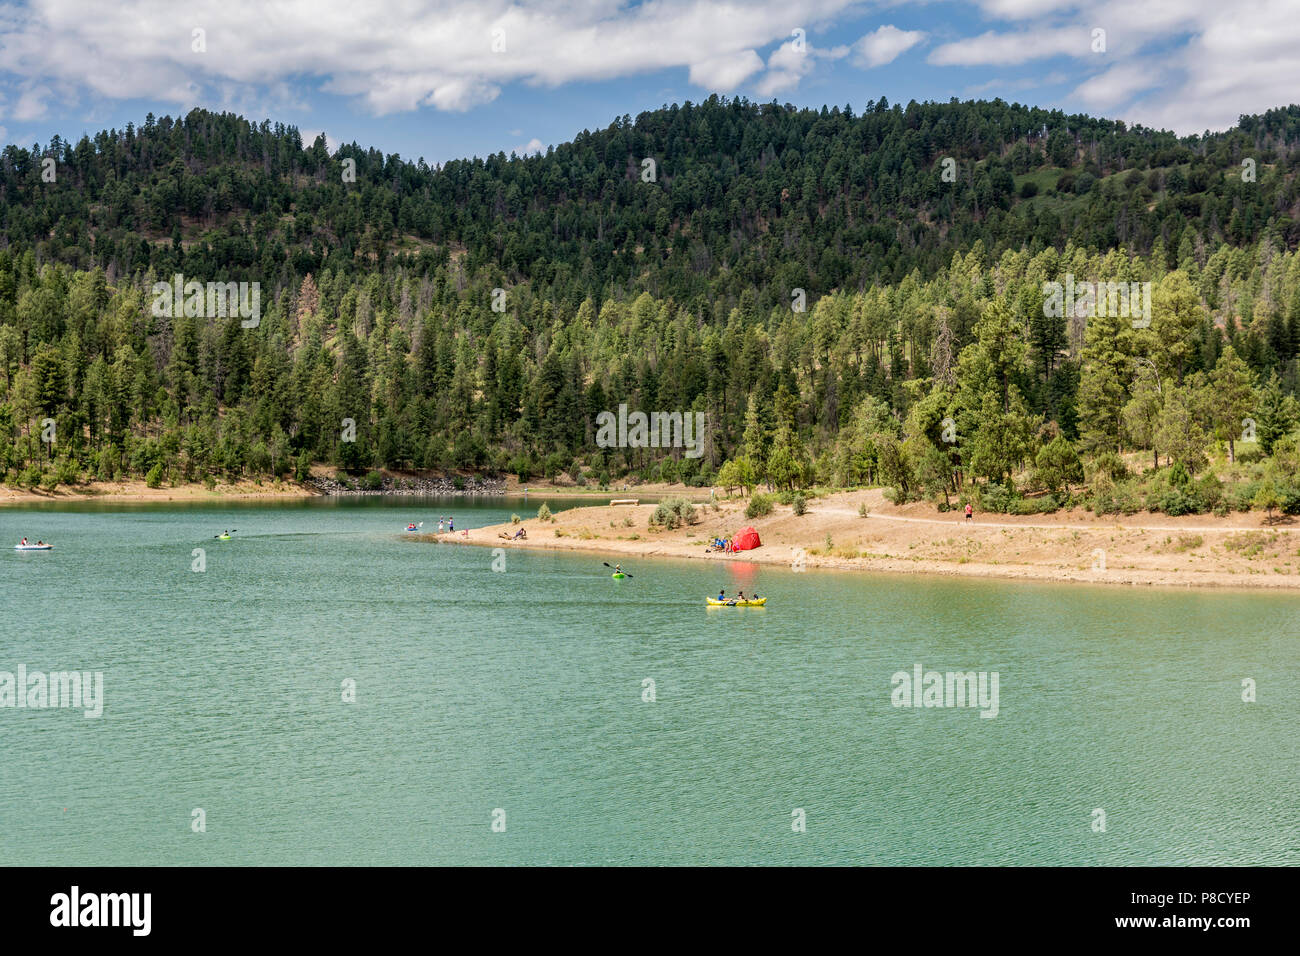 People fishing, kayaking and canoeing surrounded by pine trees at Grindstone Lake in the New Mexico mountains near Ruidoso, USA. Stock Photo